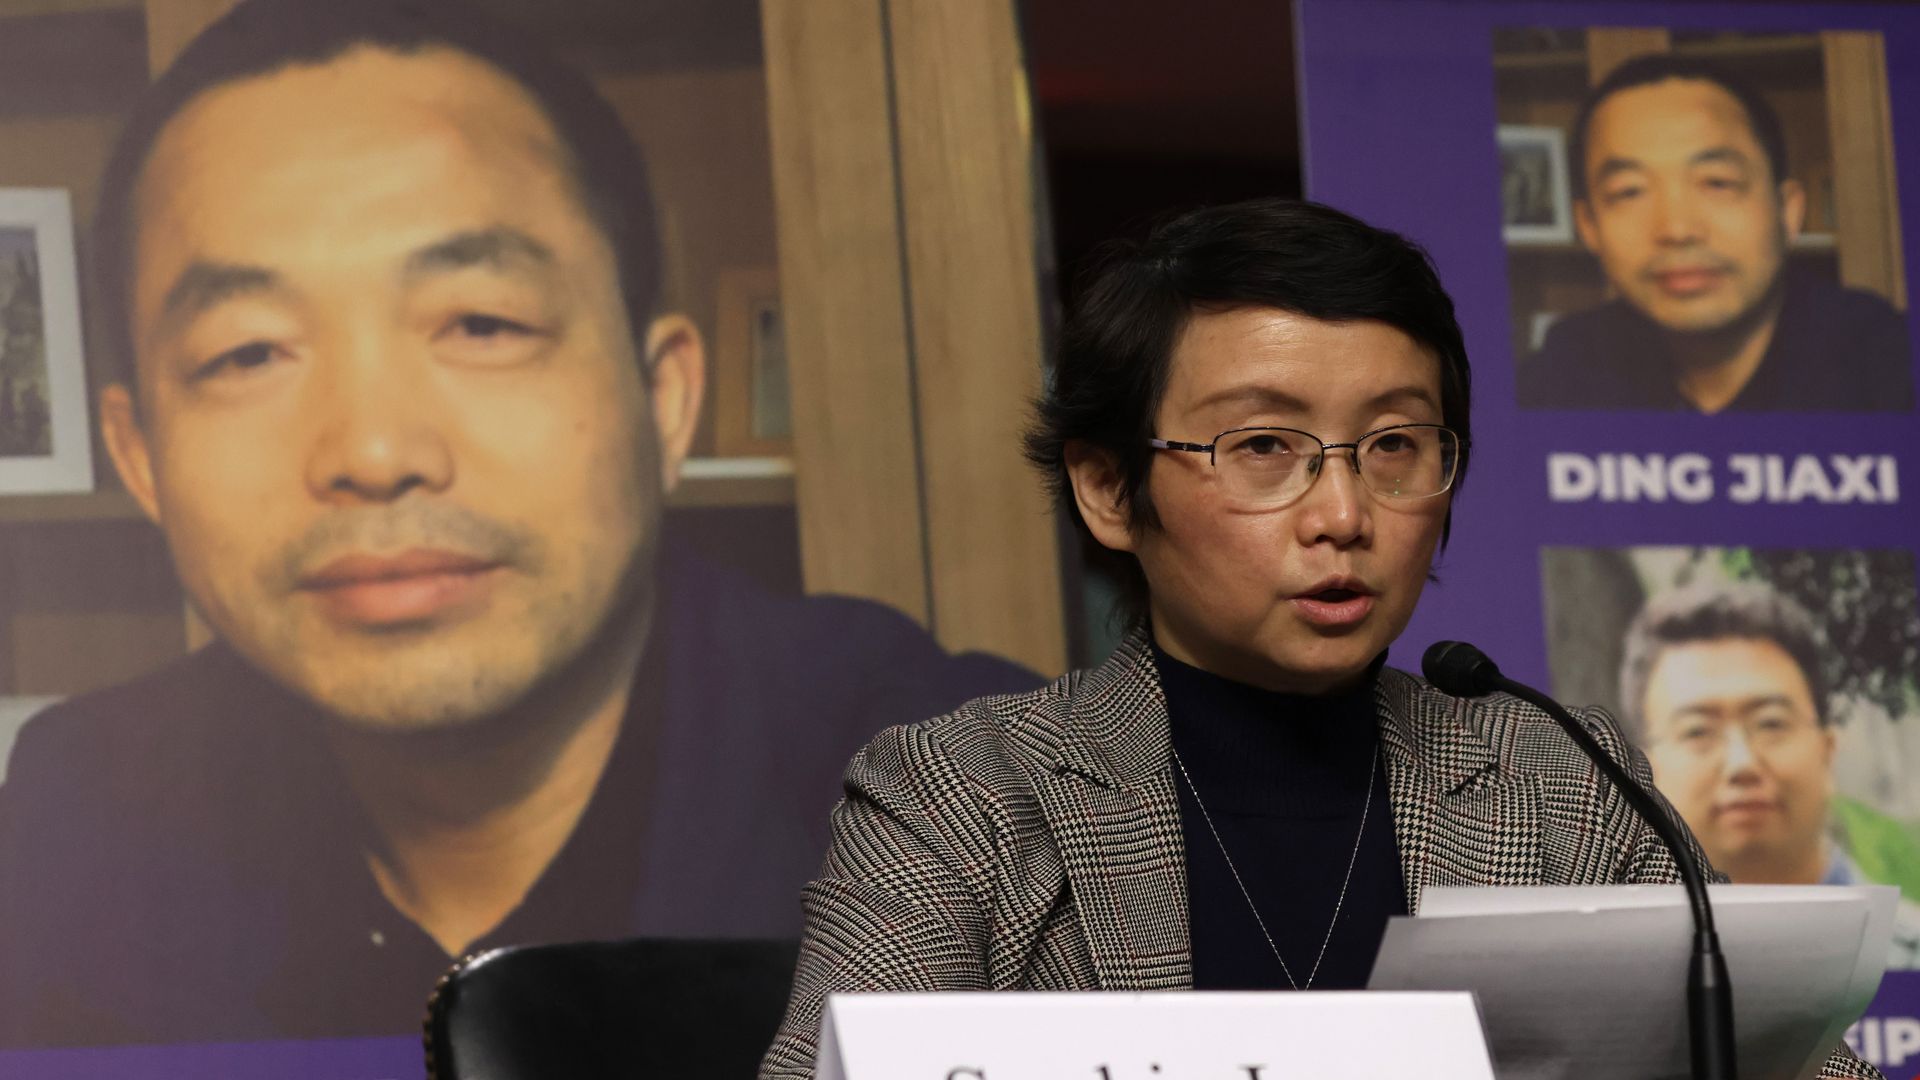 Chinese human rights activist Ding Jiaxi's wife Sophie Luo testifies before the U.S. Congress